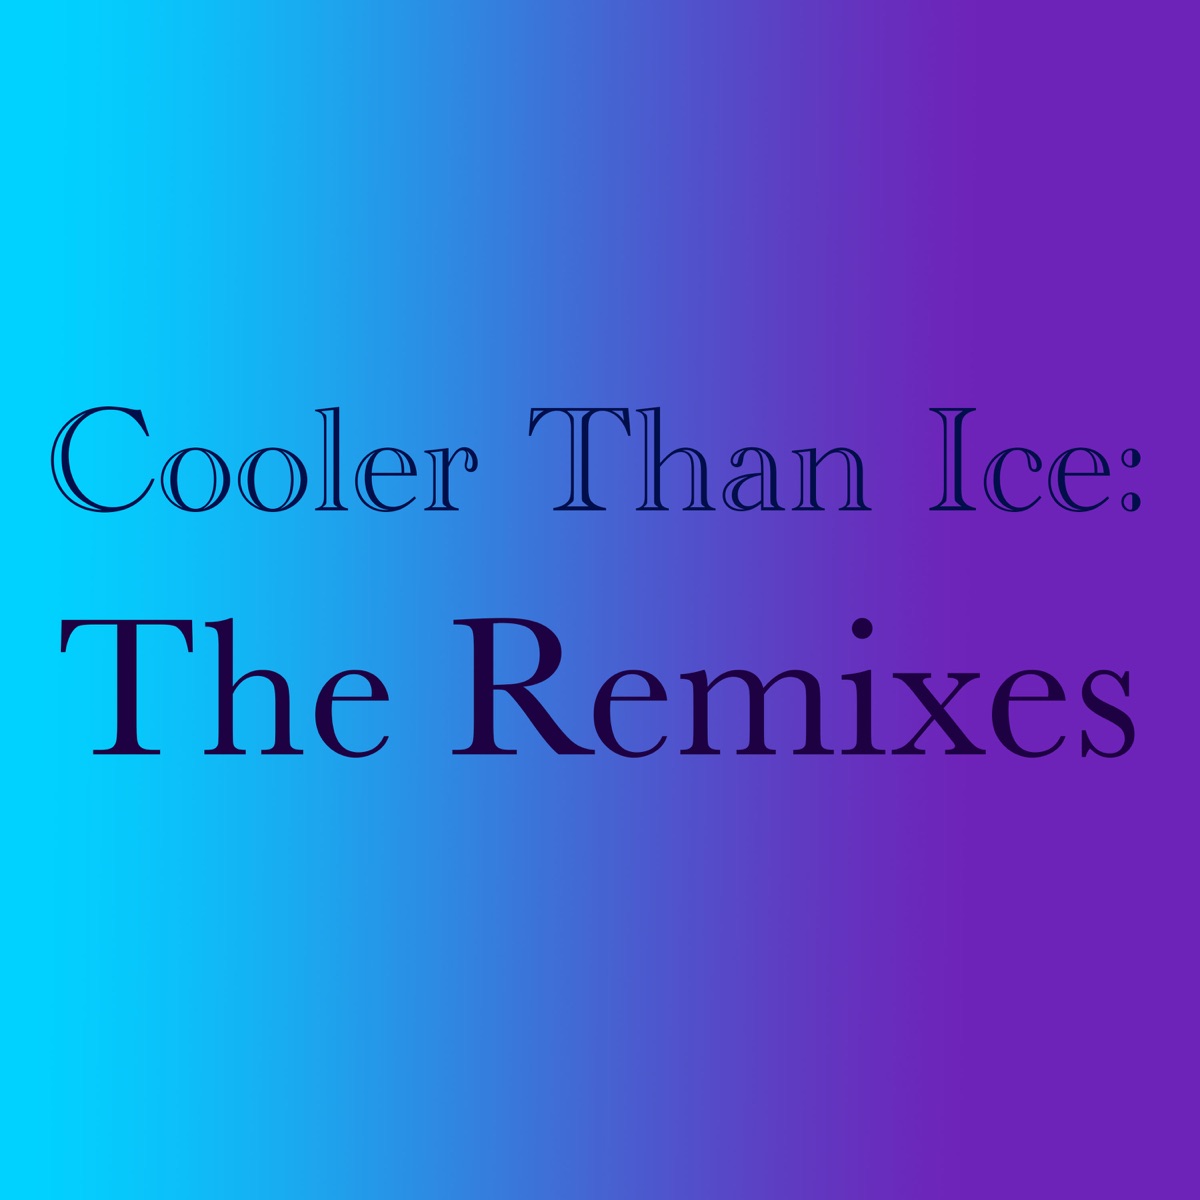 Cooler Than Ice: Remixes - Single by Jftyty on Apple Music